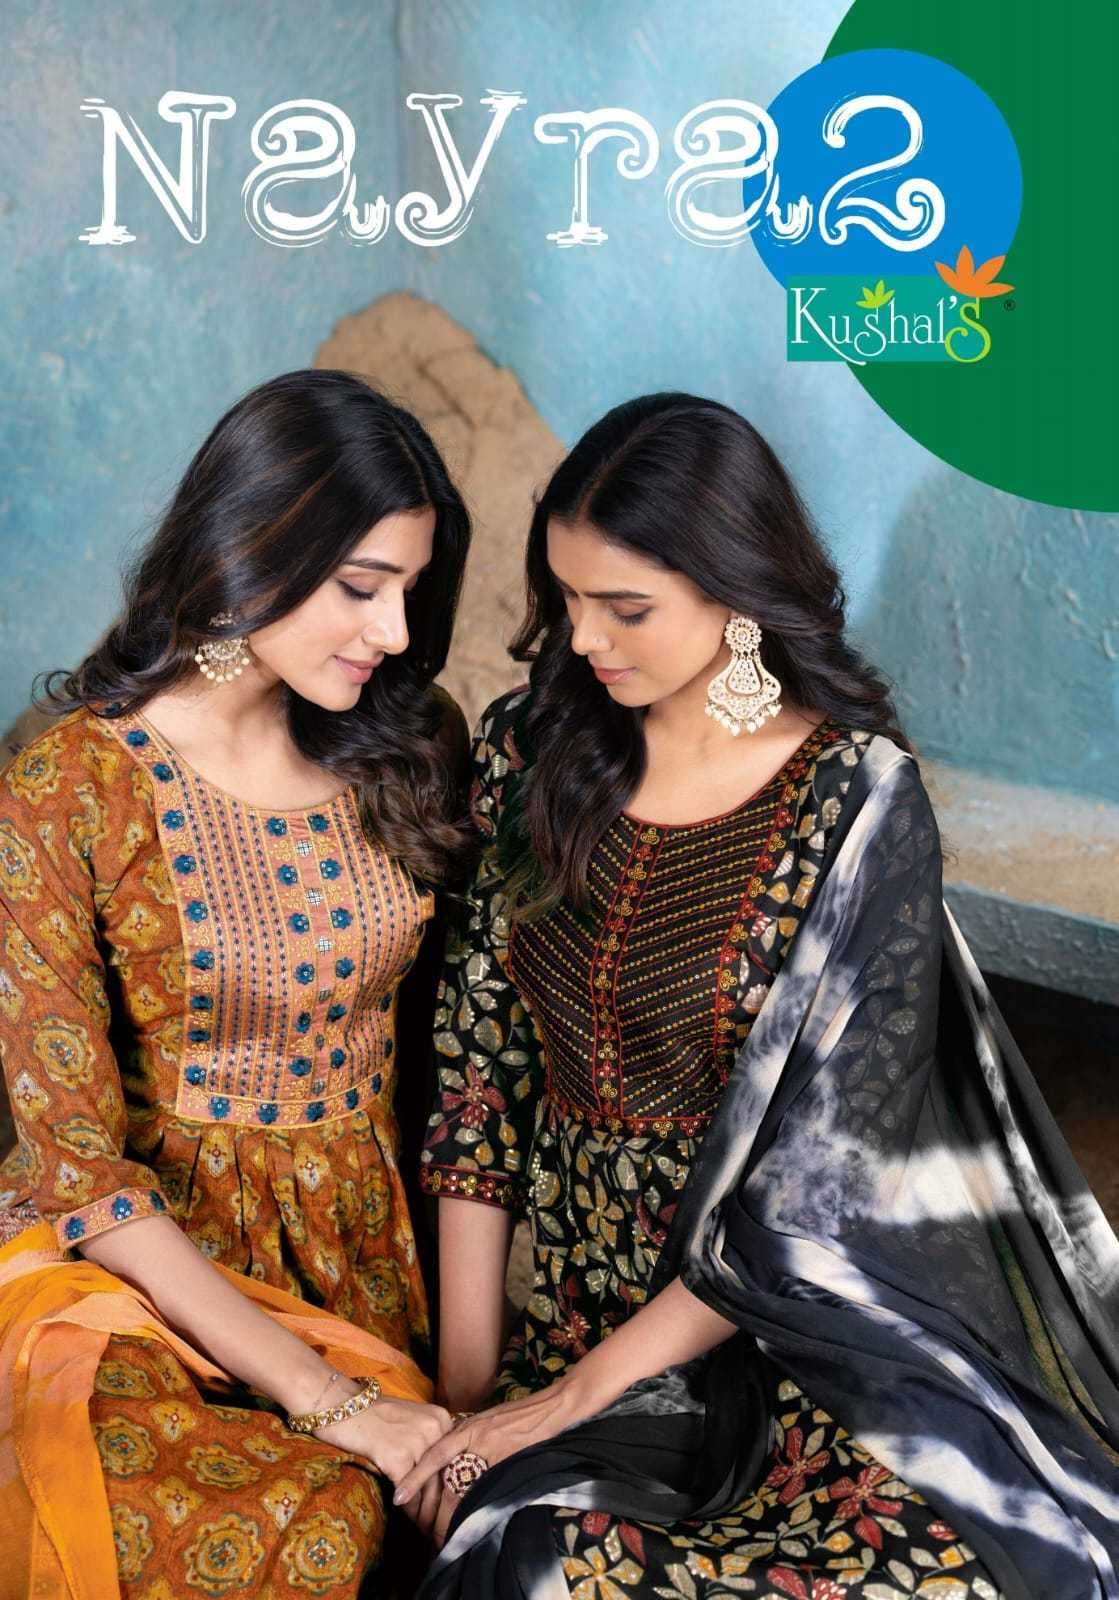 Khushal Nayra vol 2 Rayon with Fancy Readymade Suits collect...